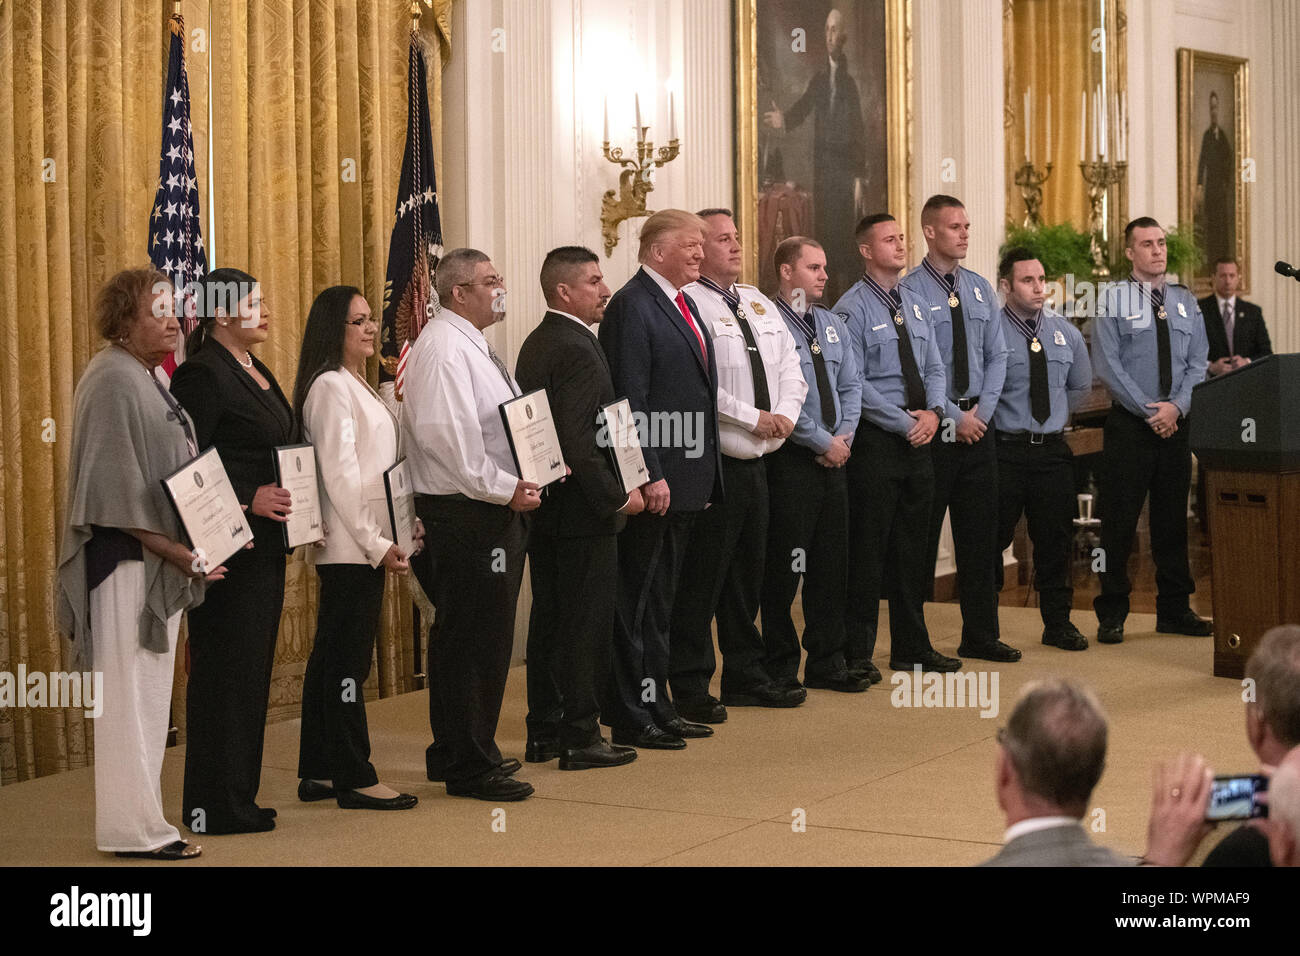 Washington, United States. 09th Sep, 2019. President Donald Trump smiles for a group photos during a ceremony in the East Room at the White House in Washington, DC on Monday, September 9, 2019. Trump gave Heroic Commendations awards to five El Paso citizens and six Dayton officers who help stop separate mass shootings with automatic weapons in El Paso and Dayton that claimed the lives of 31 people on consecutive days in August. Photo by Pat Benic/UPI. Credit: UPI/Alamy Live News Stock Photo